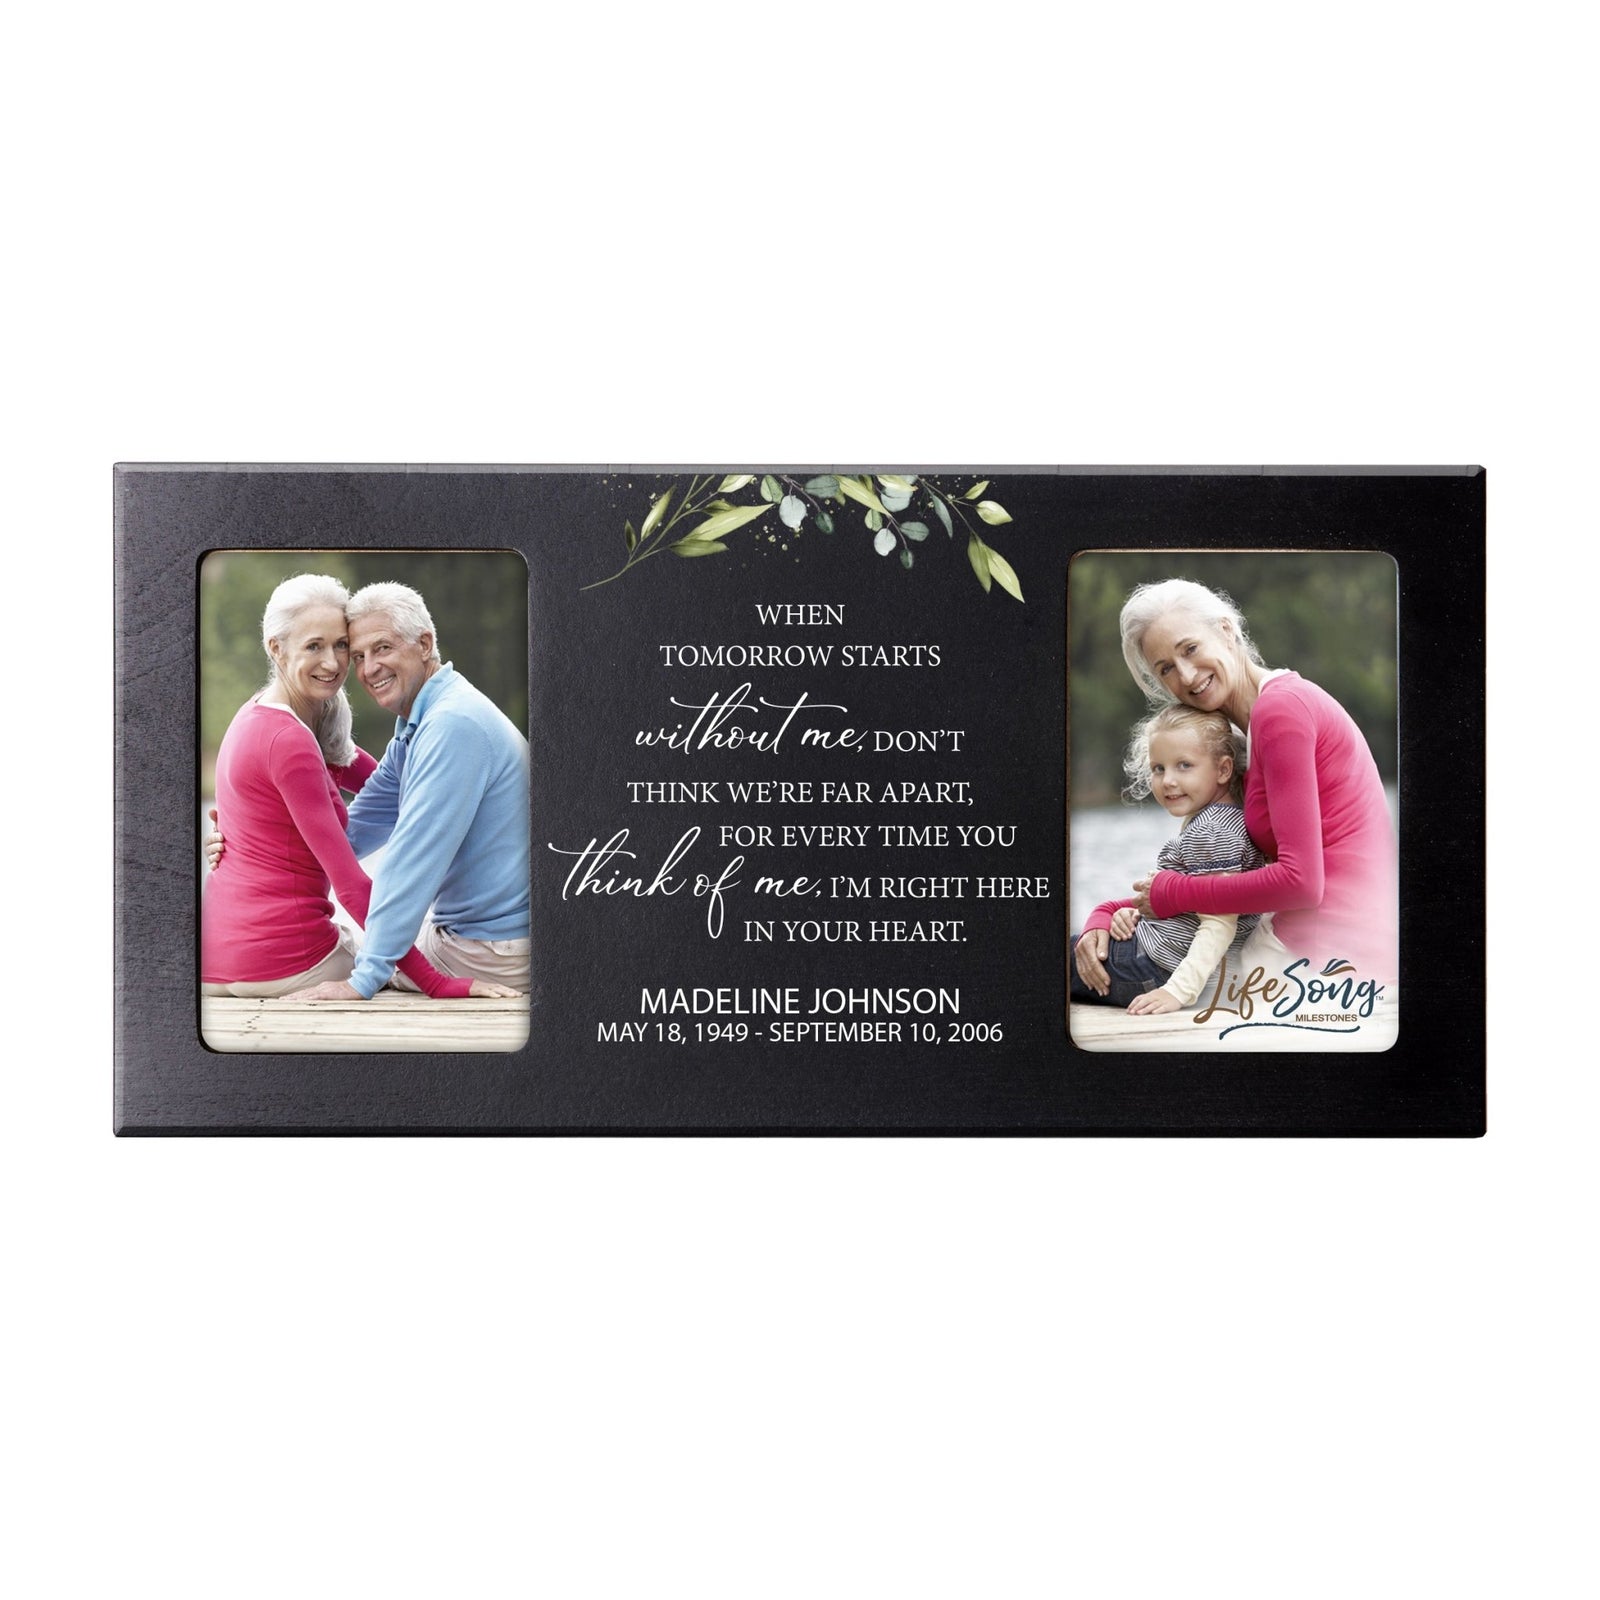 Custom Memorial Picture Frame 16x8in Holds Two 4x6in Photos - When Tomorrow Starts - LifeSong Milestones